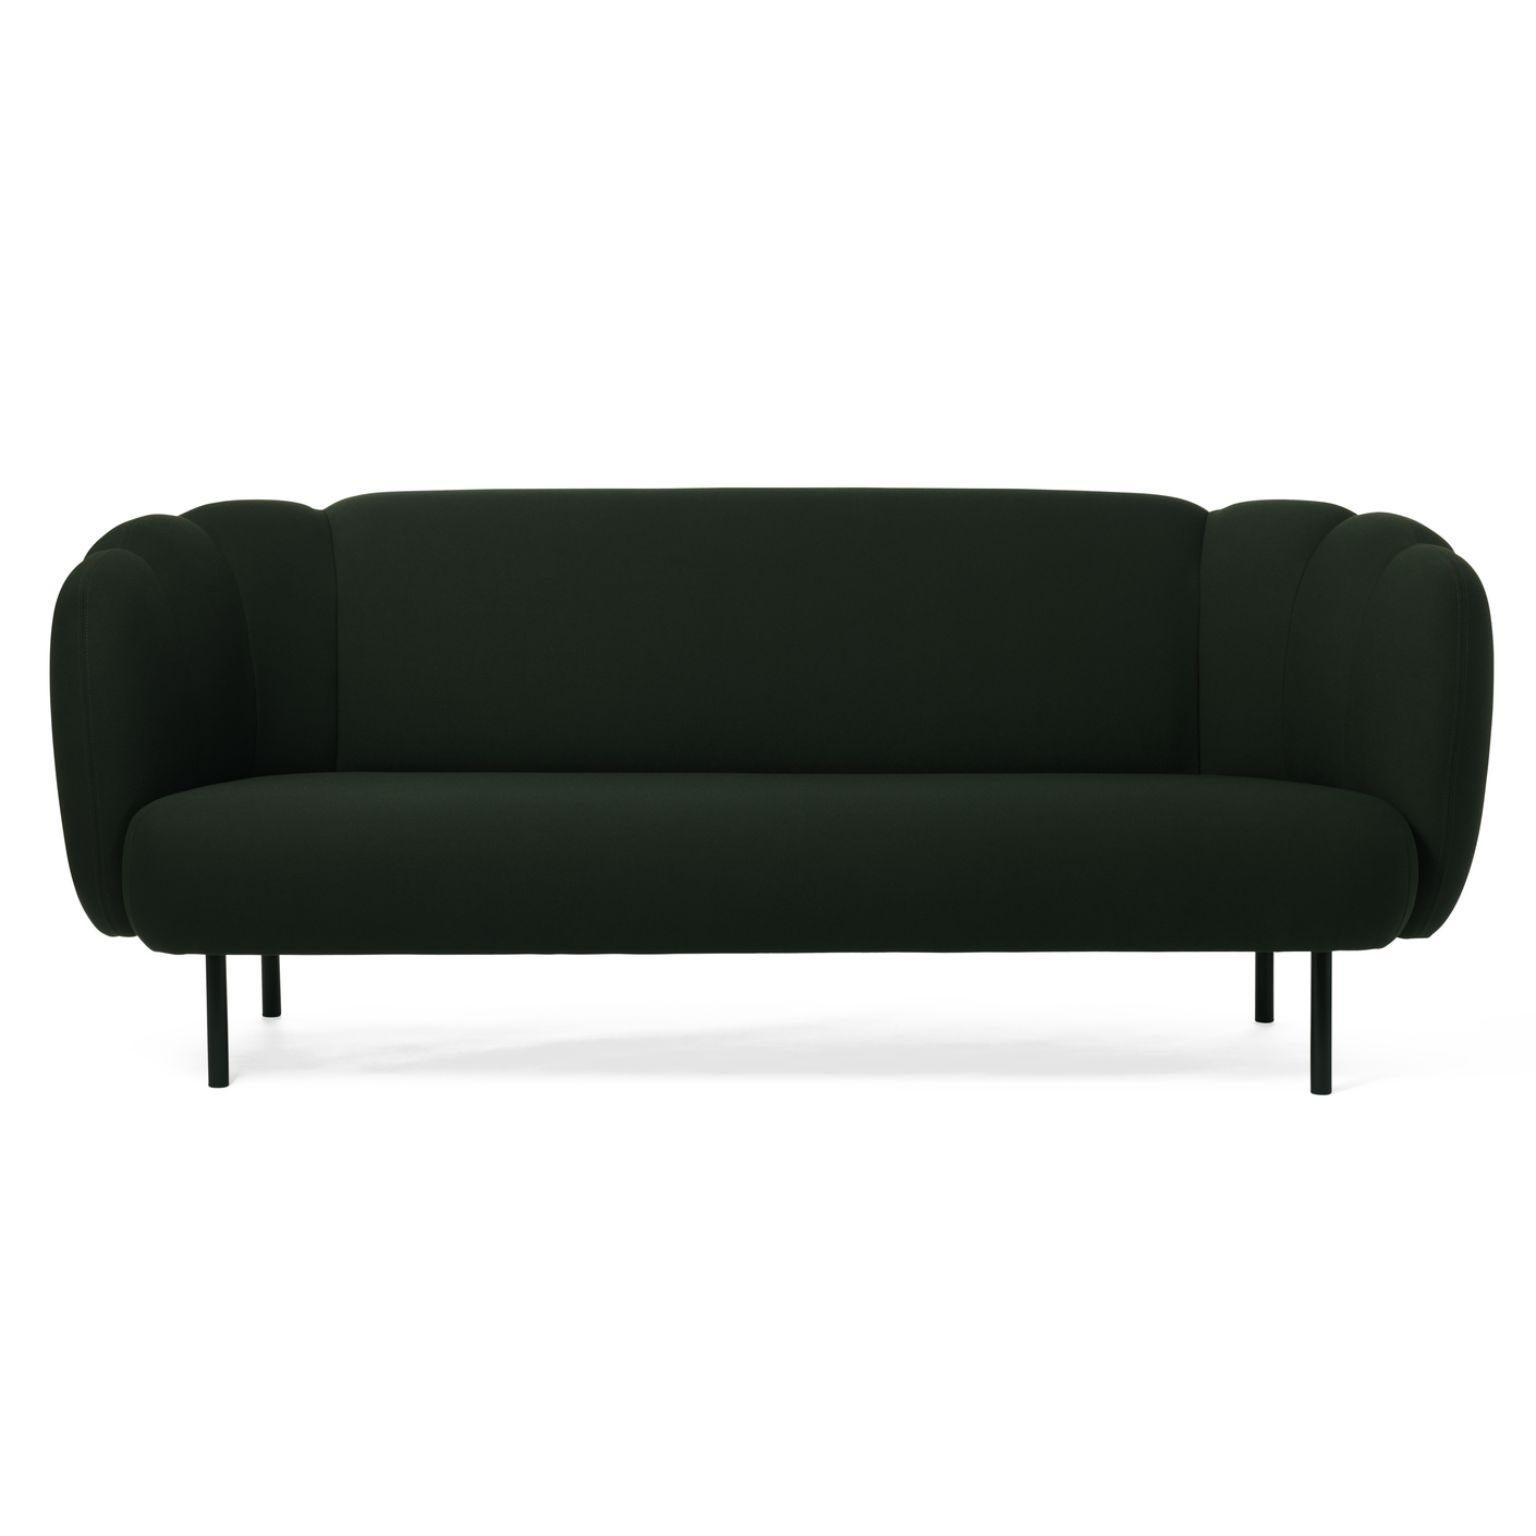 Caper 3 seater with stitches forest green by Warm Nordic
Dimensions: D 200 x W 84 x H 80 cm
Material: Textile upholstery, Wooden frame, Powder coated black steel legs.
Weight: 55.5 kg
Also available in different colours and finishes.

An